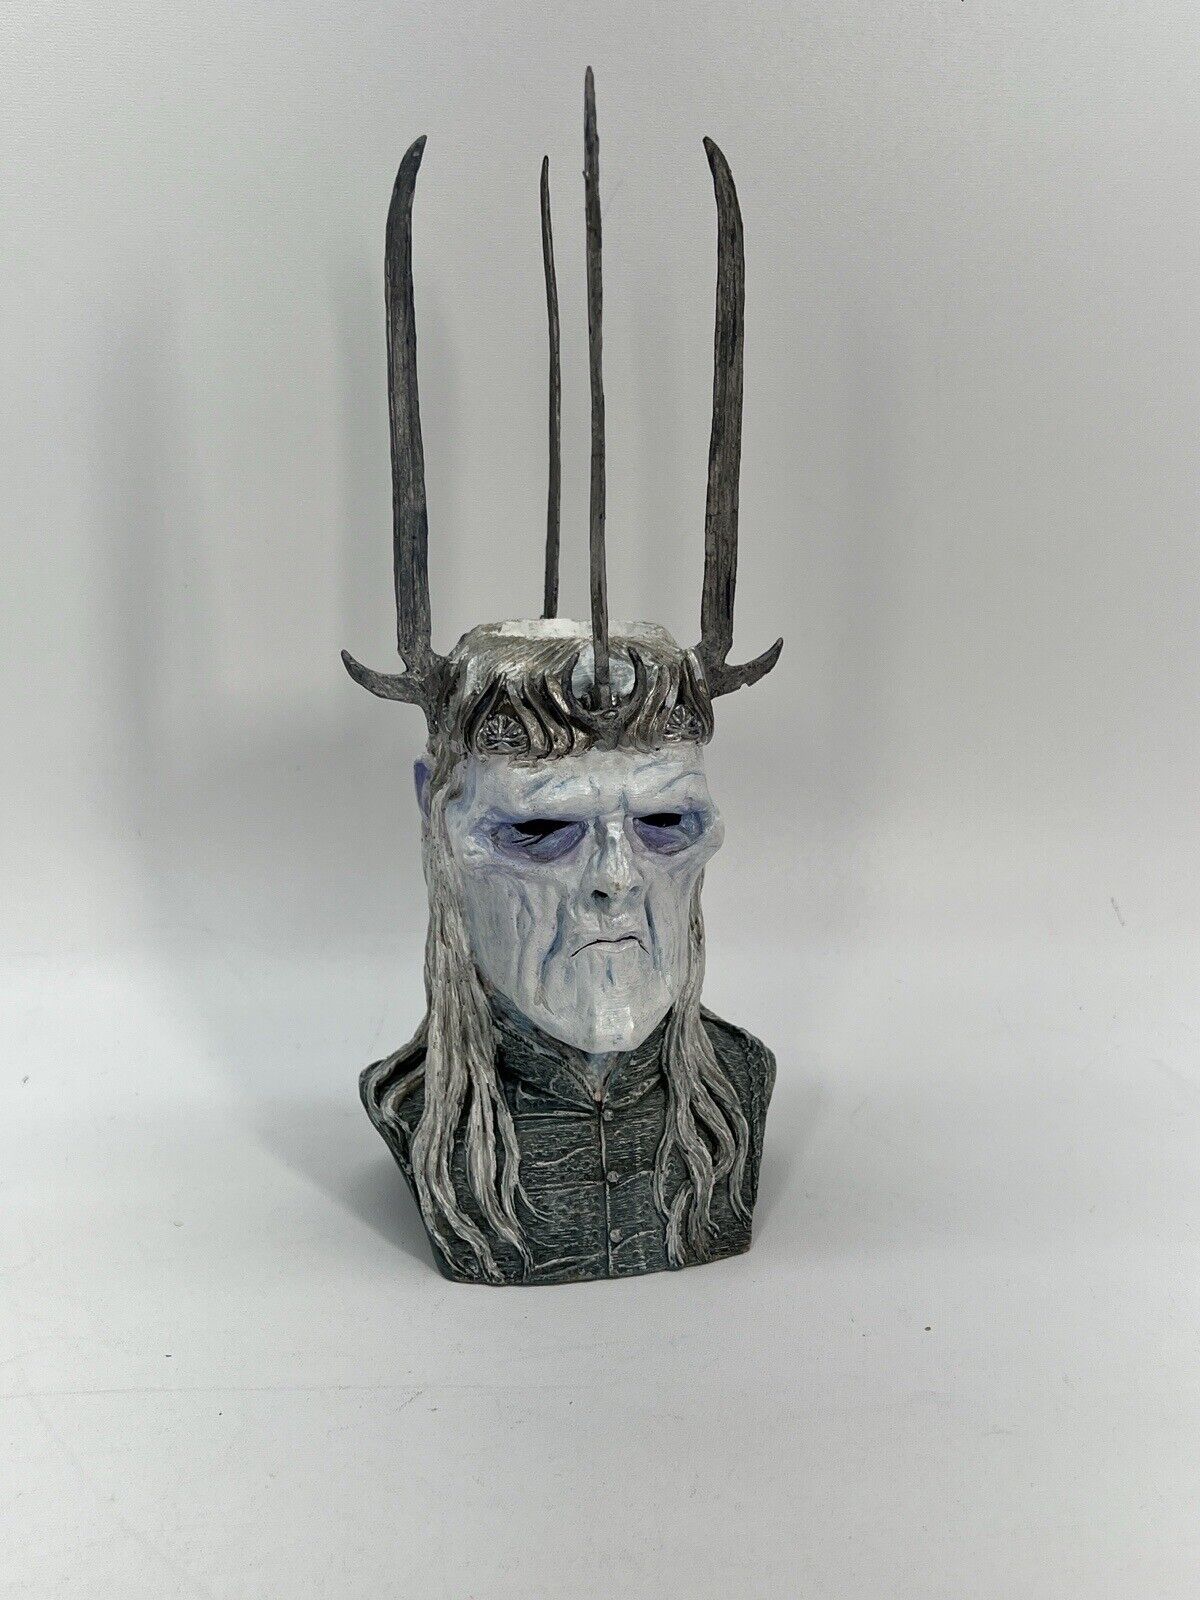 Neca Lord of the Rings, Witch King of Angmar Votive candle holder bust statue